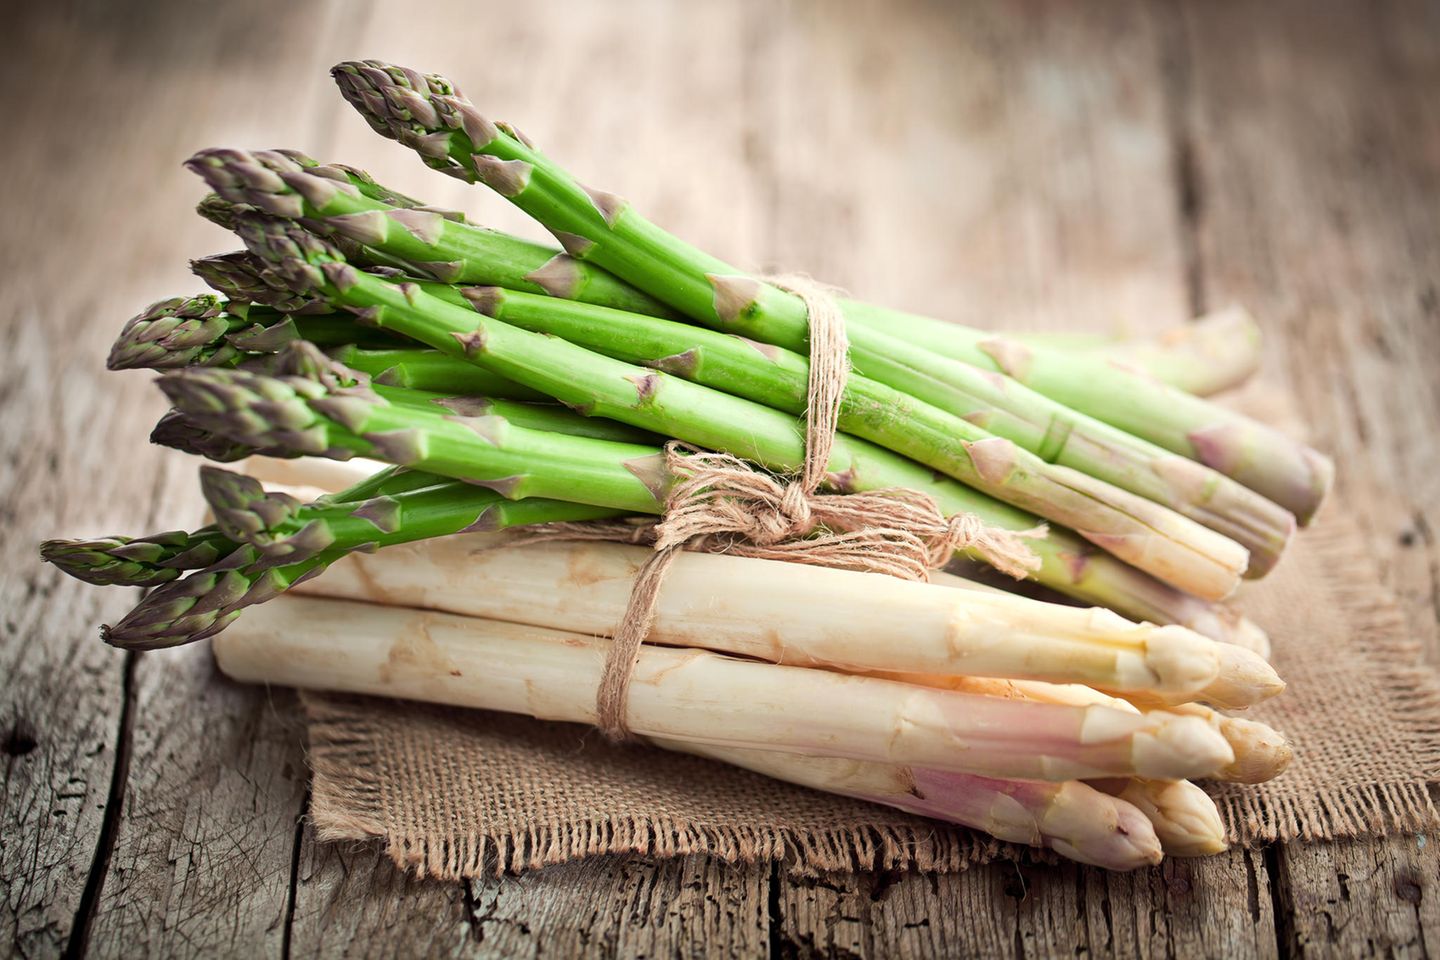 Green or white asparagus: which is healthier?